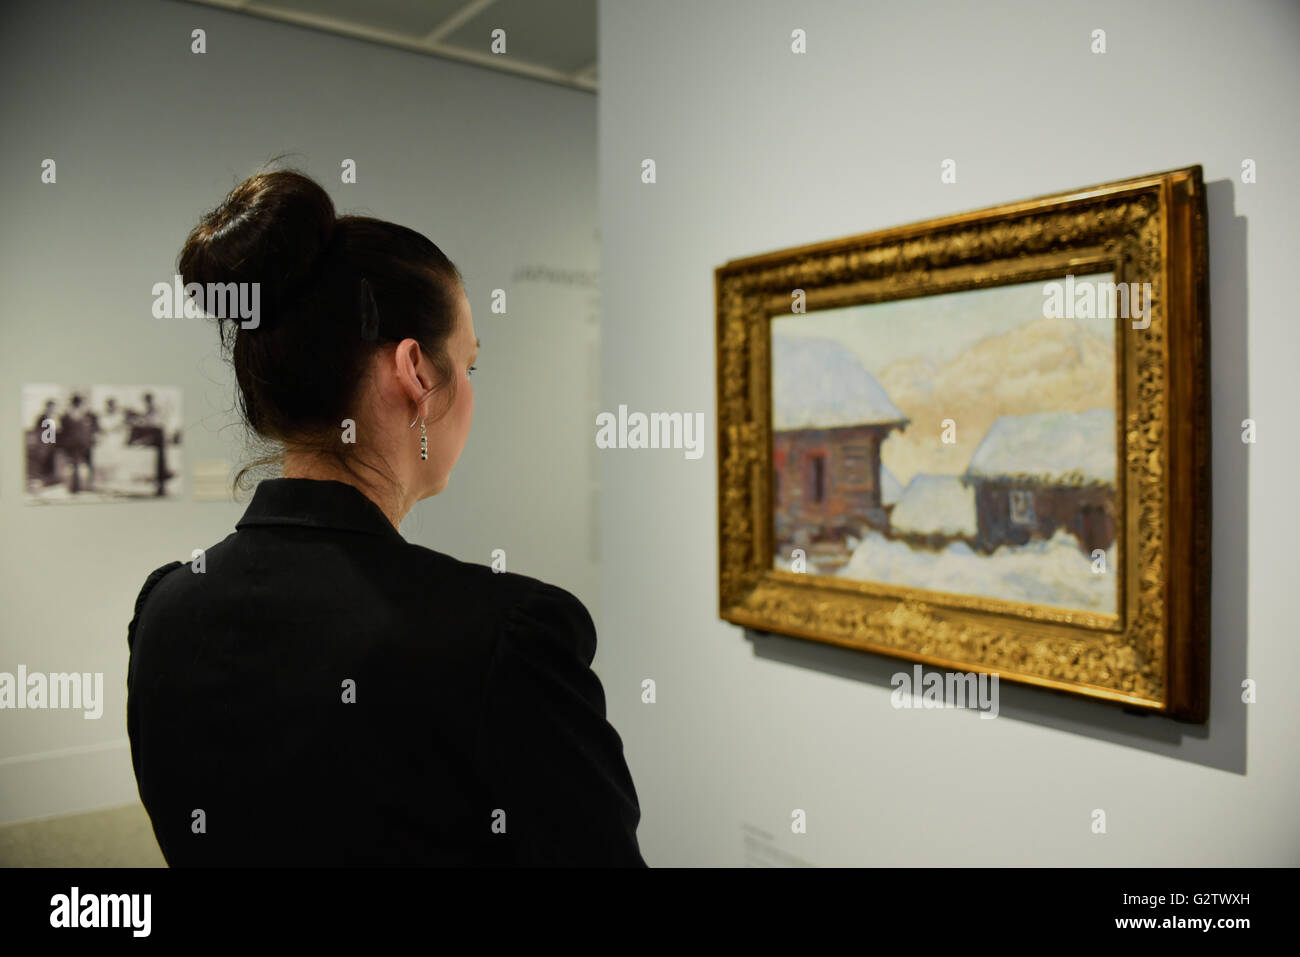 07.10.2015, Bonn, North Rhine-Westphalia, Germany - In the Bonn Art and Exhibition Hall will be held from 8 October 2015 until 21 February 20156 the exhibition Japan's love of Impressionism instead. Photo: View of the exhibition, image of Claude Monet, Houses in the snow and the mountain Kolsaas (li), 1895. Germany, Bonn, 07.10.2015 - In the Bonn Art and Exhibition Hall will be held from 8 October 2015 to 21 February 20156, the exhibition Japan's love of Impressionism instead. Photo: View of the exhibition, image of Claude Monet, Houses in the snow and the mountain Kolsaas (li), 1895th ESP1510 Stock Photo